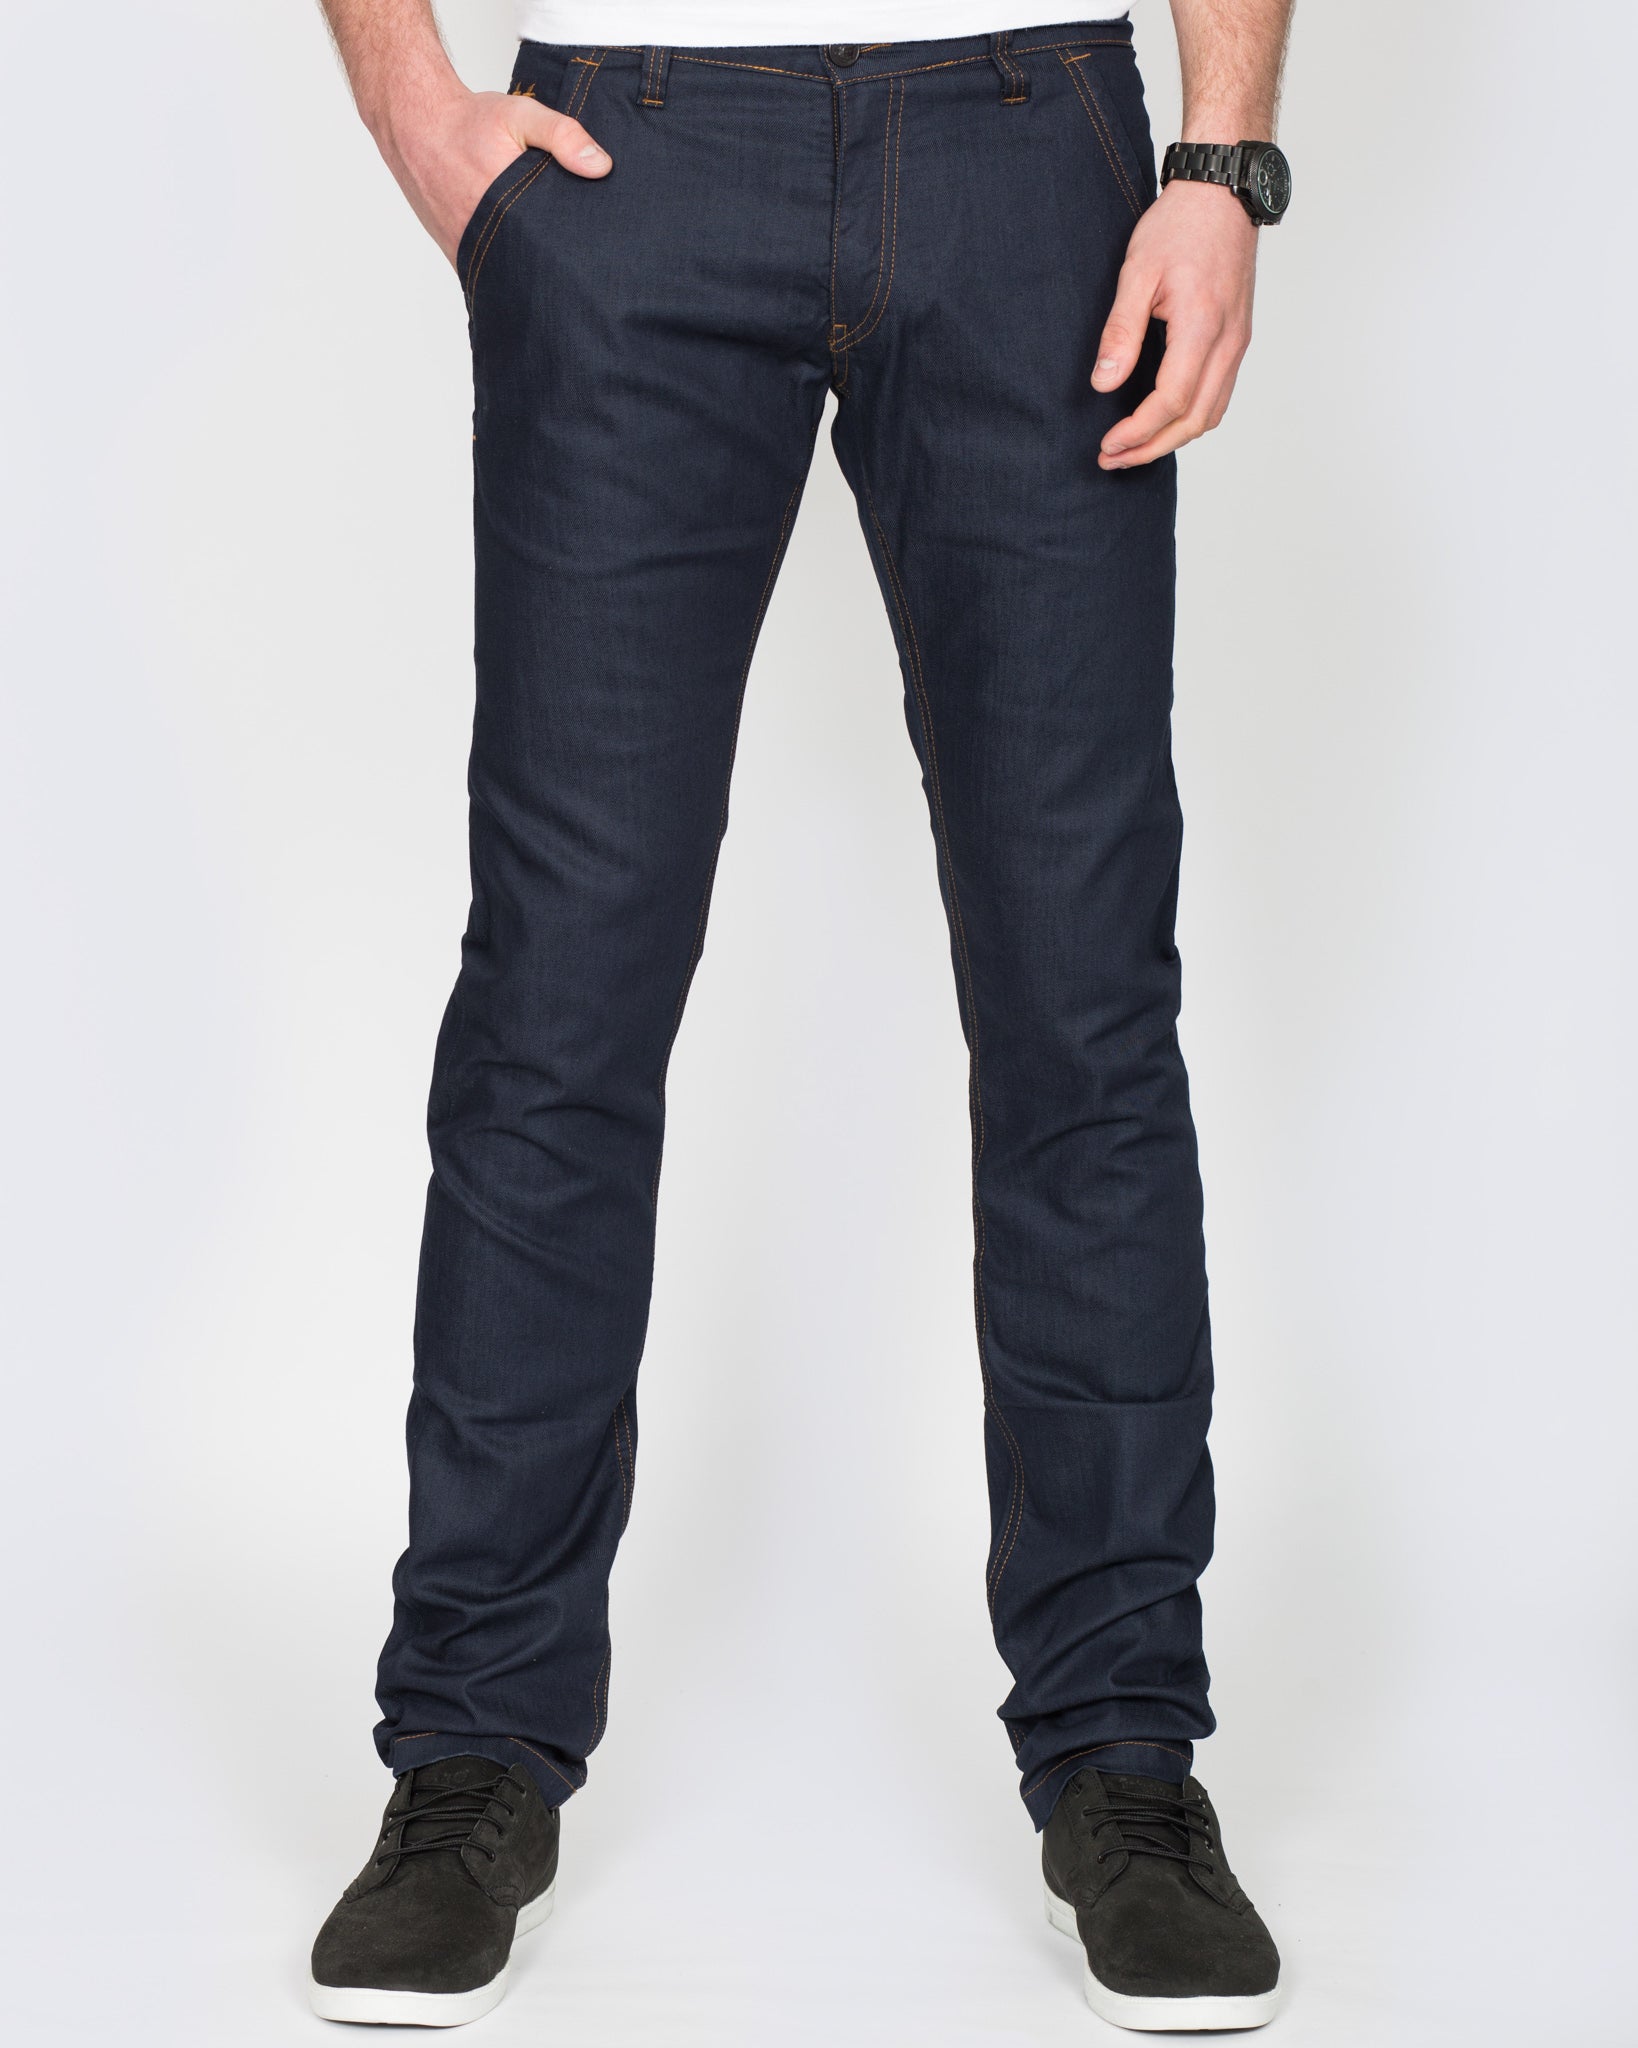 Cub Fox Tapered Fit Tall Denim Chinos (lovely blue)